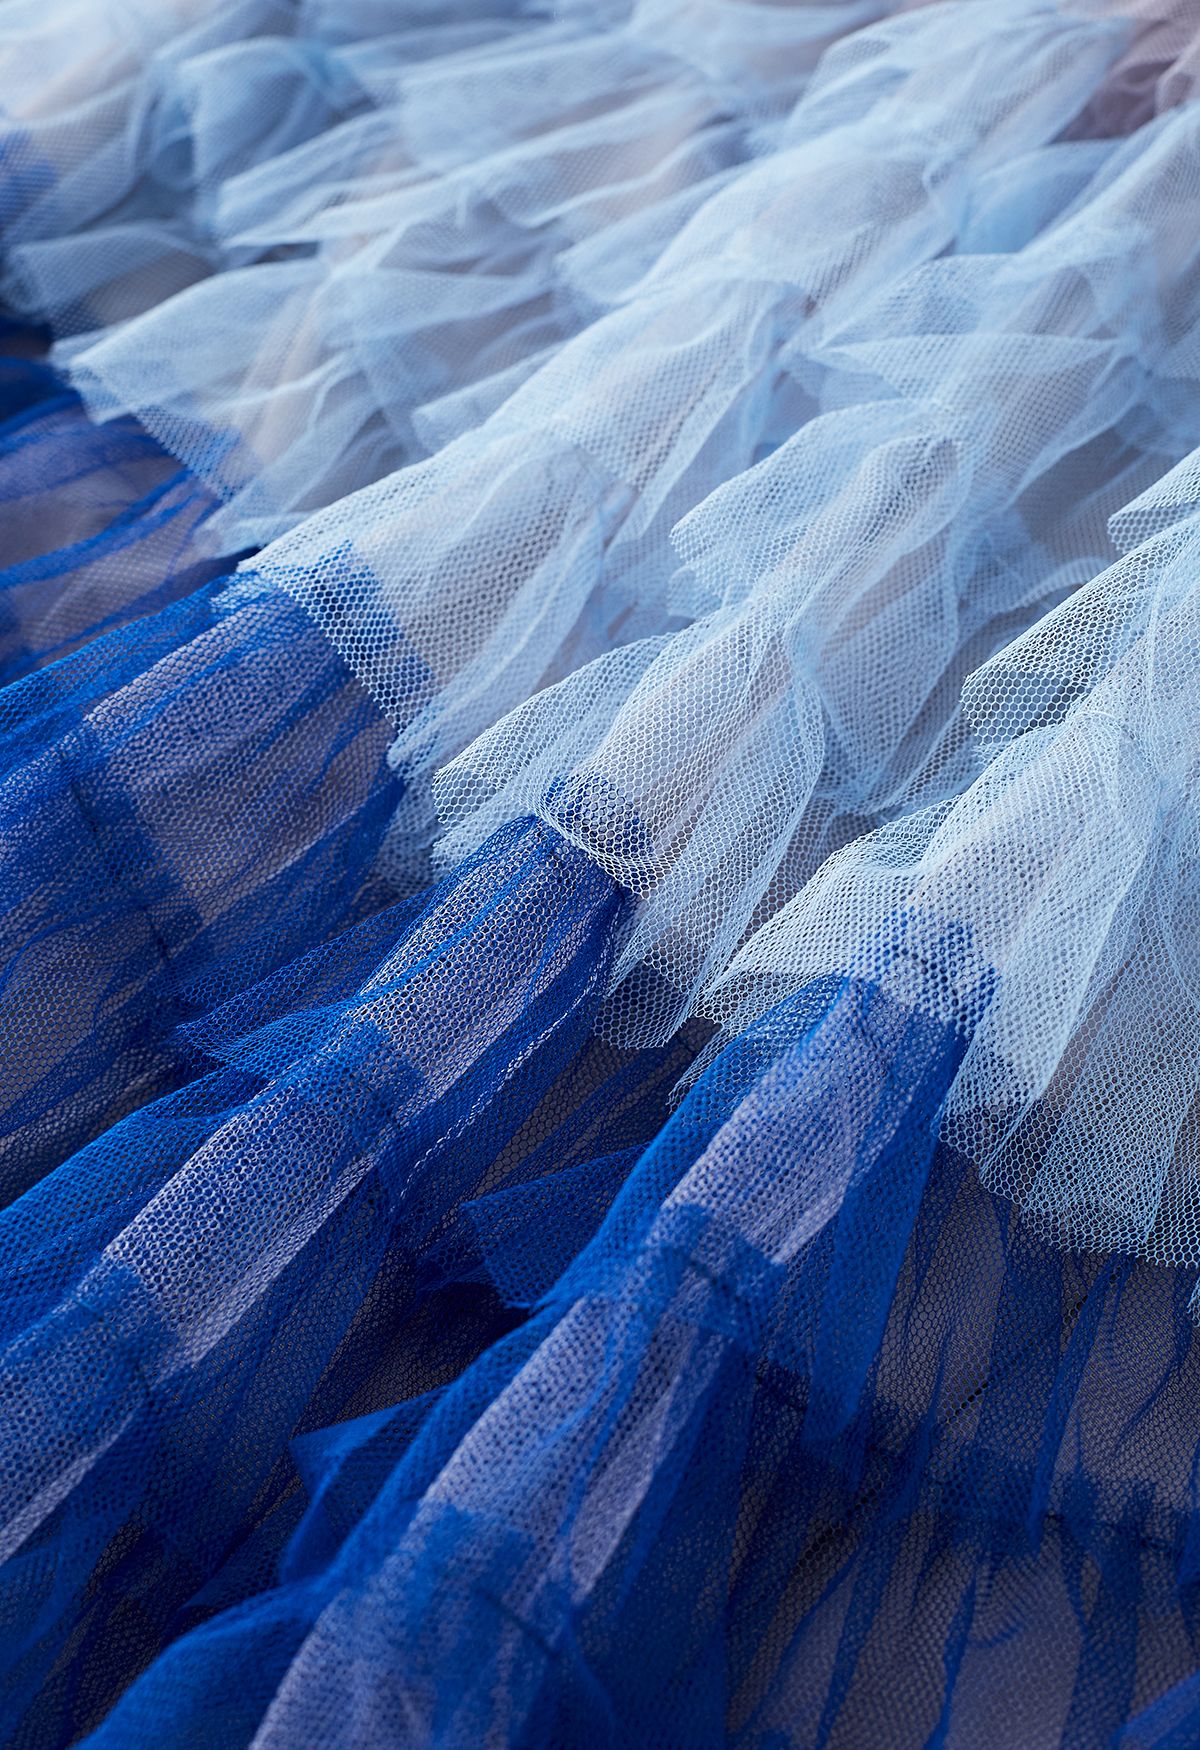 Swan Cloud Ombre Tiered Tulle Maxi Skirt in Blue